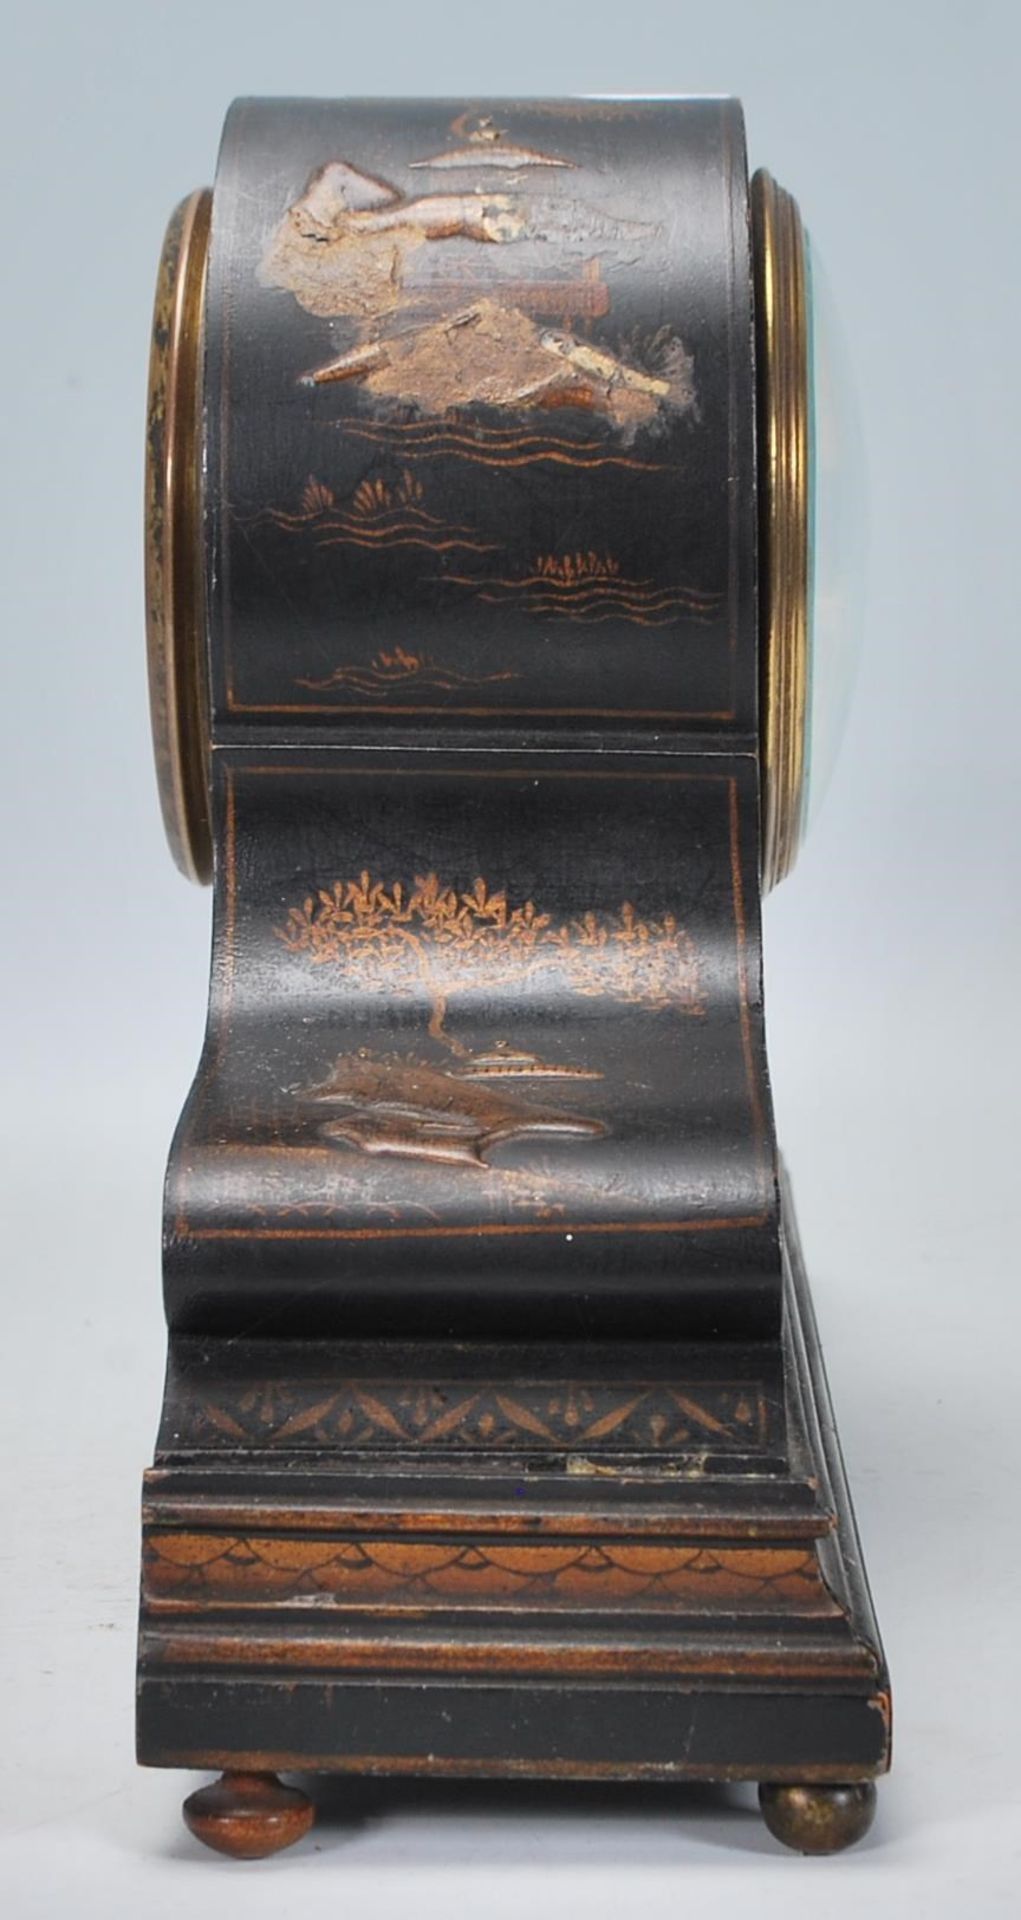 An early 20th century Japanned black lacquer and chinoiserie decorated dome top mantel clock in - Image 3 of 7